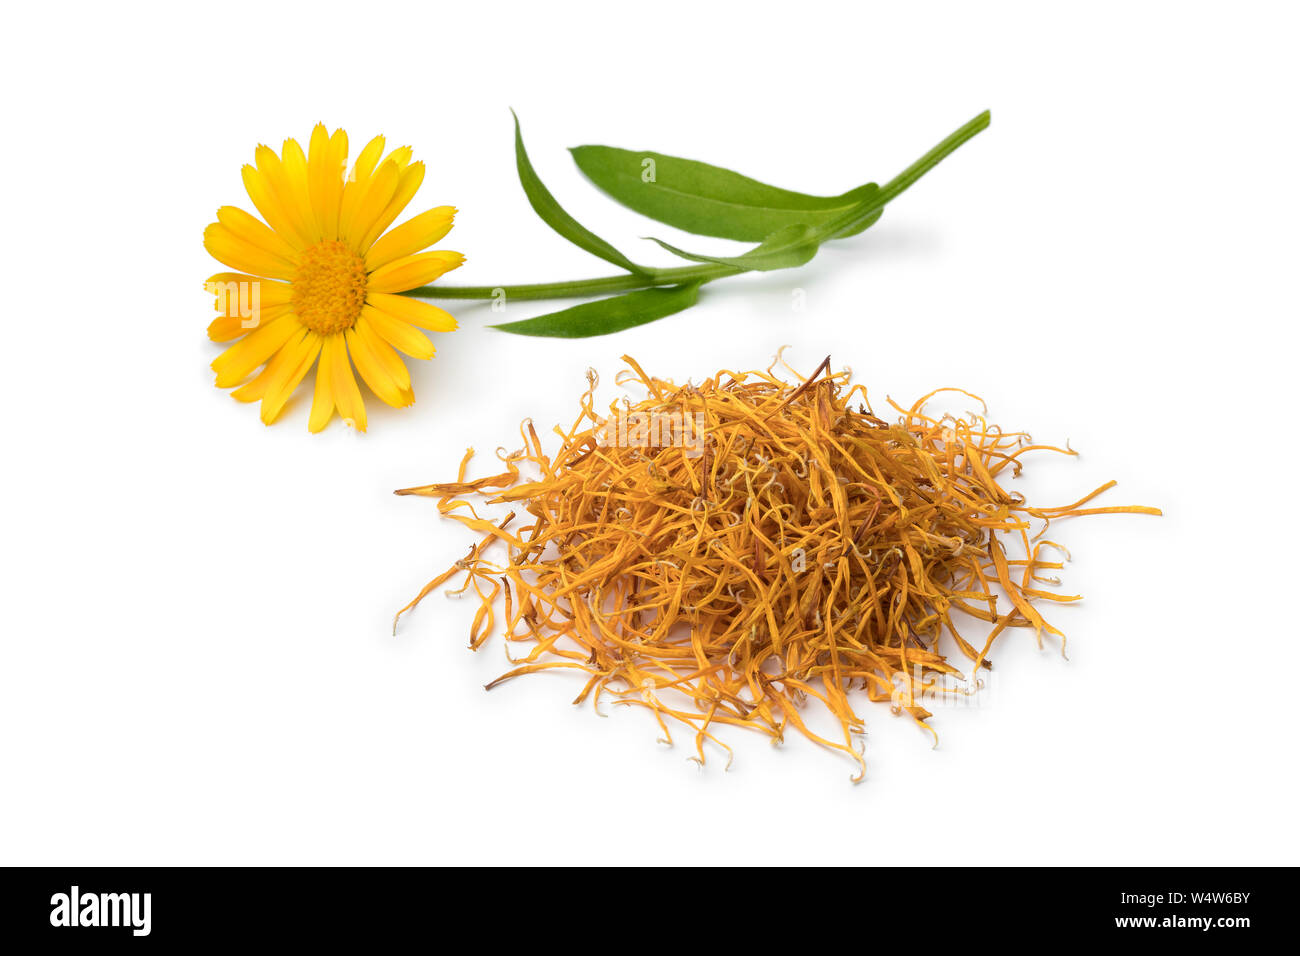 Calendula flower and a heap of dried leaves isolated on white background Stock Photo